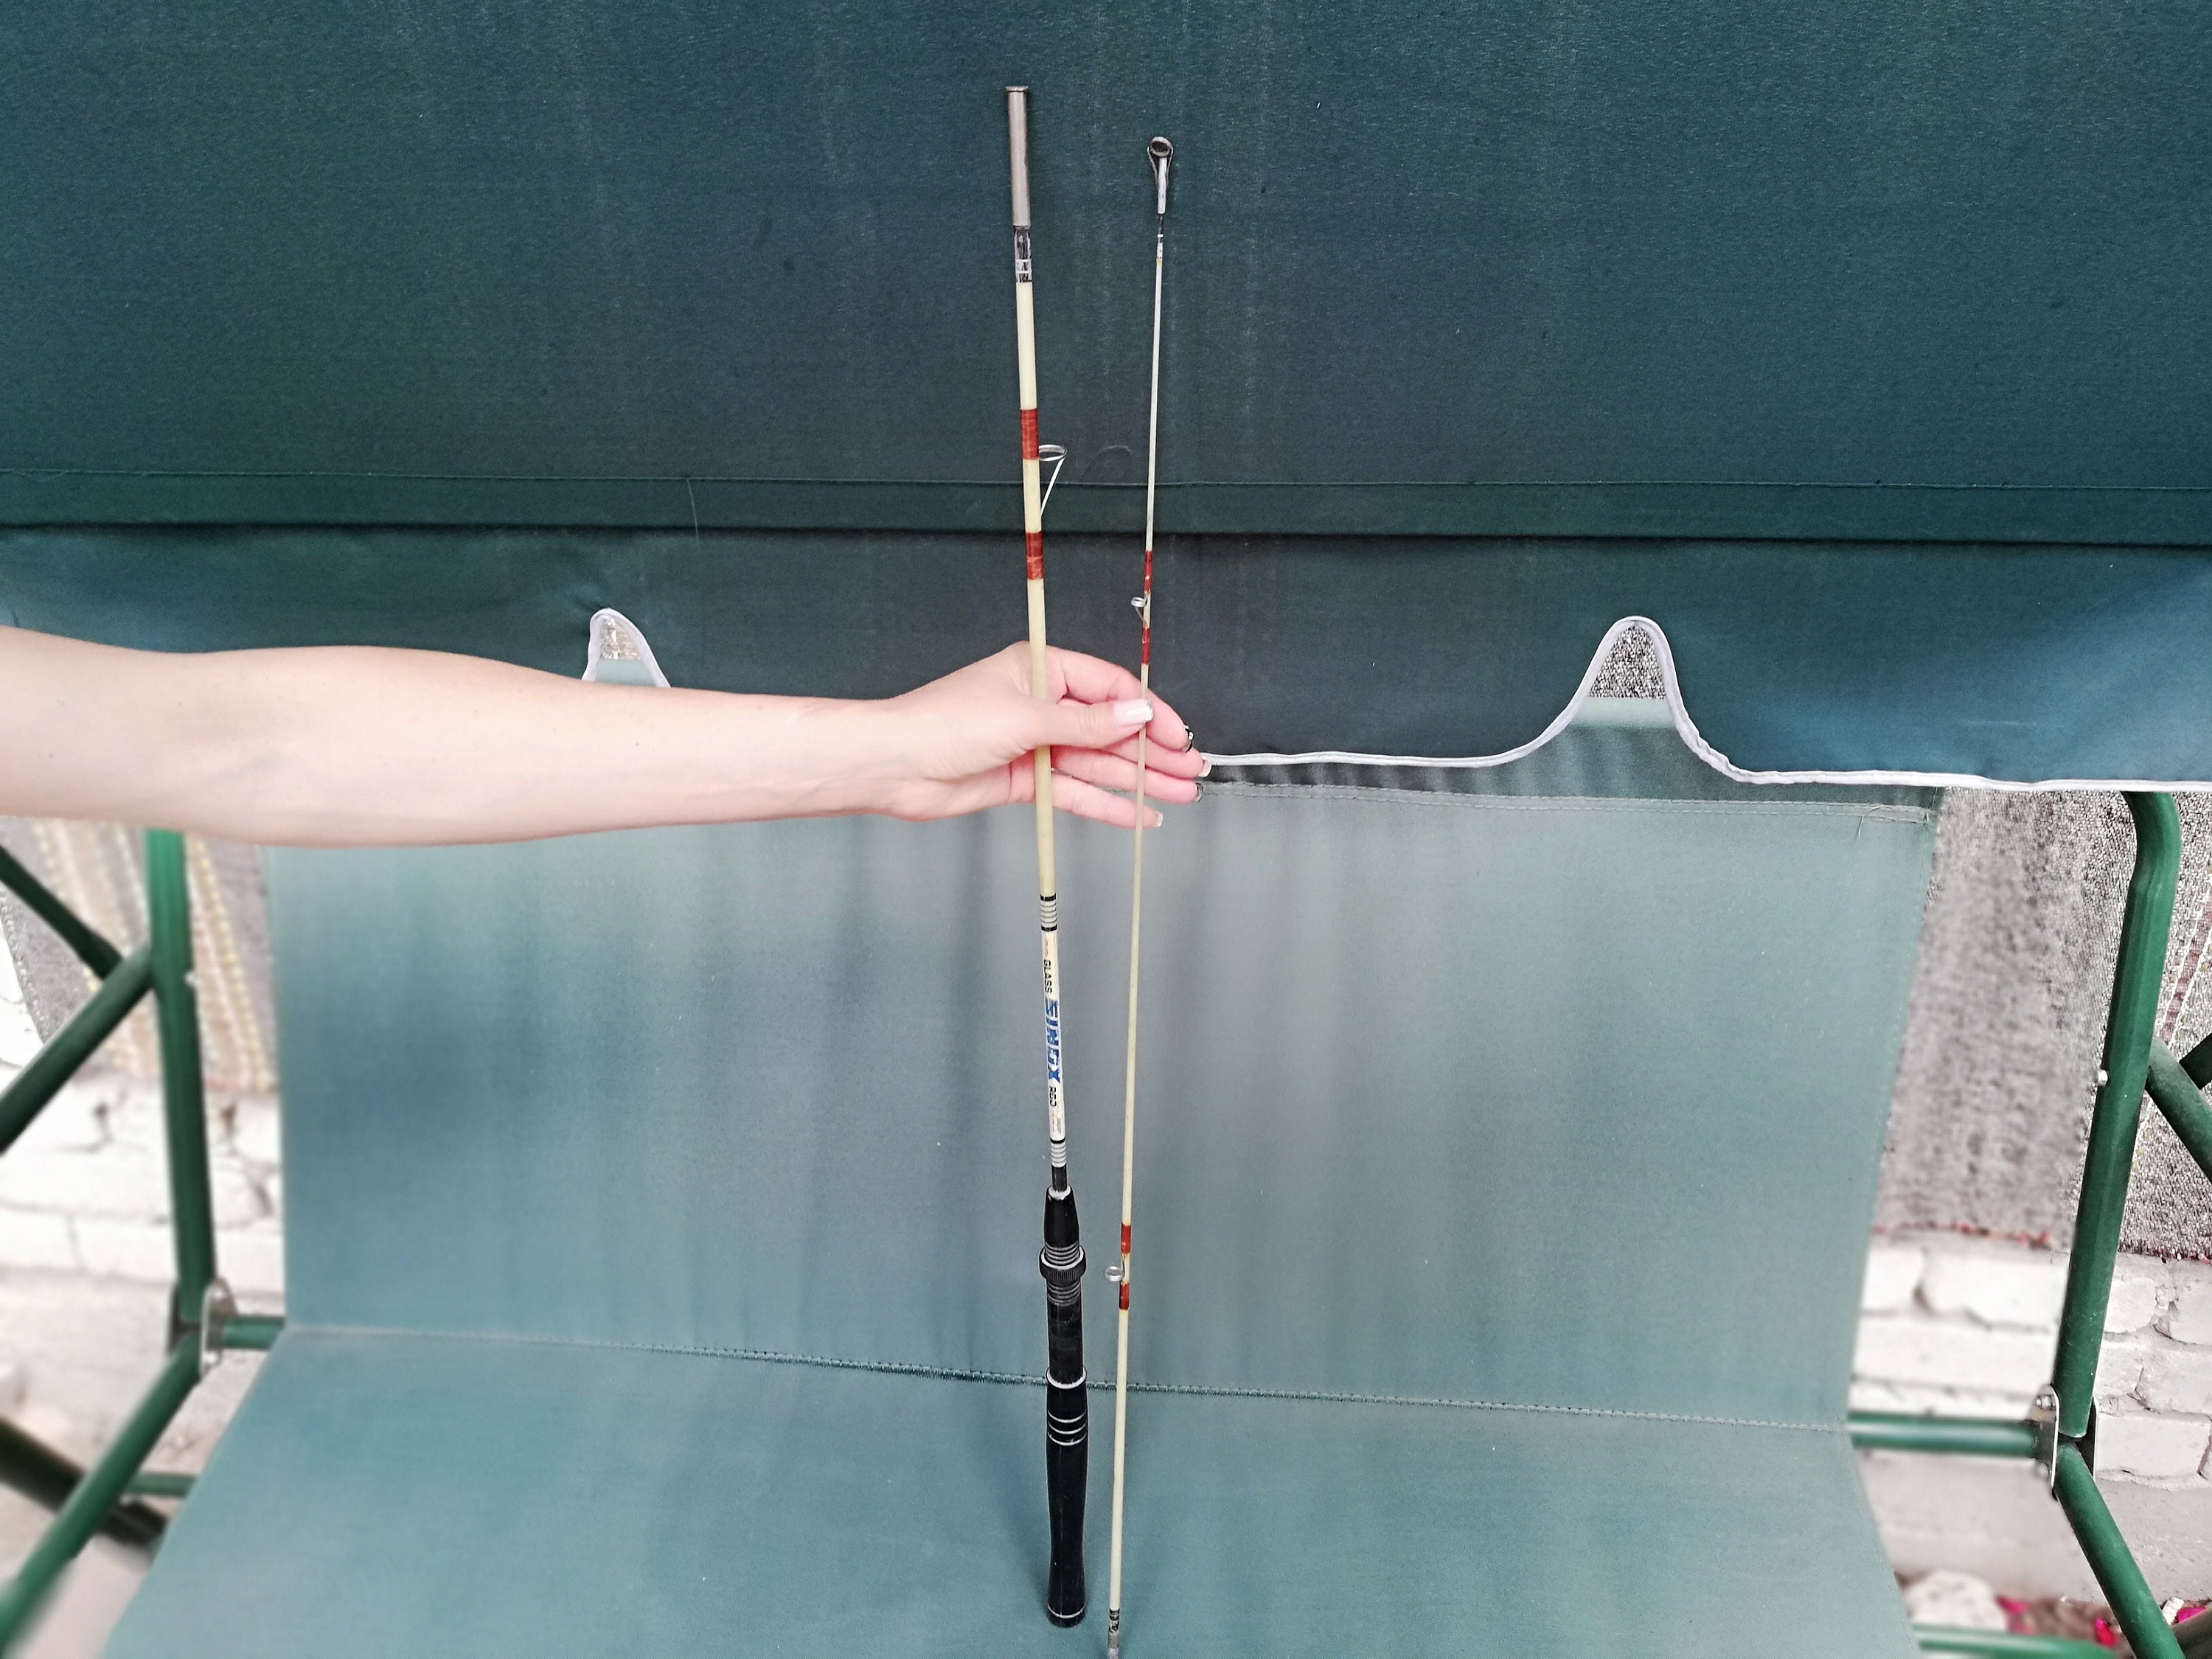 Vintage Japanese Fishing Rod From 70s, Old Fishing Rod From